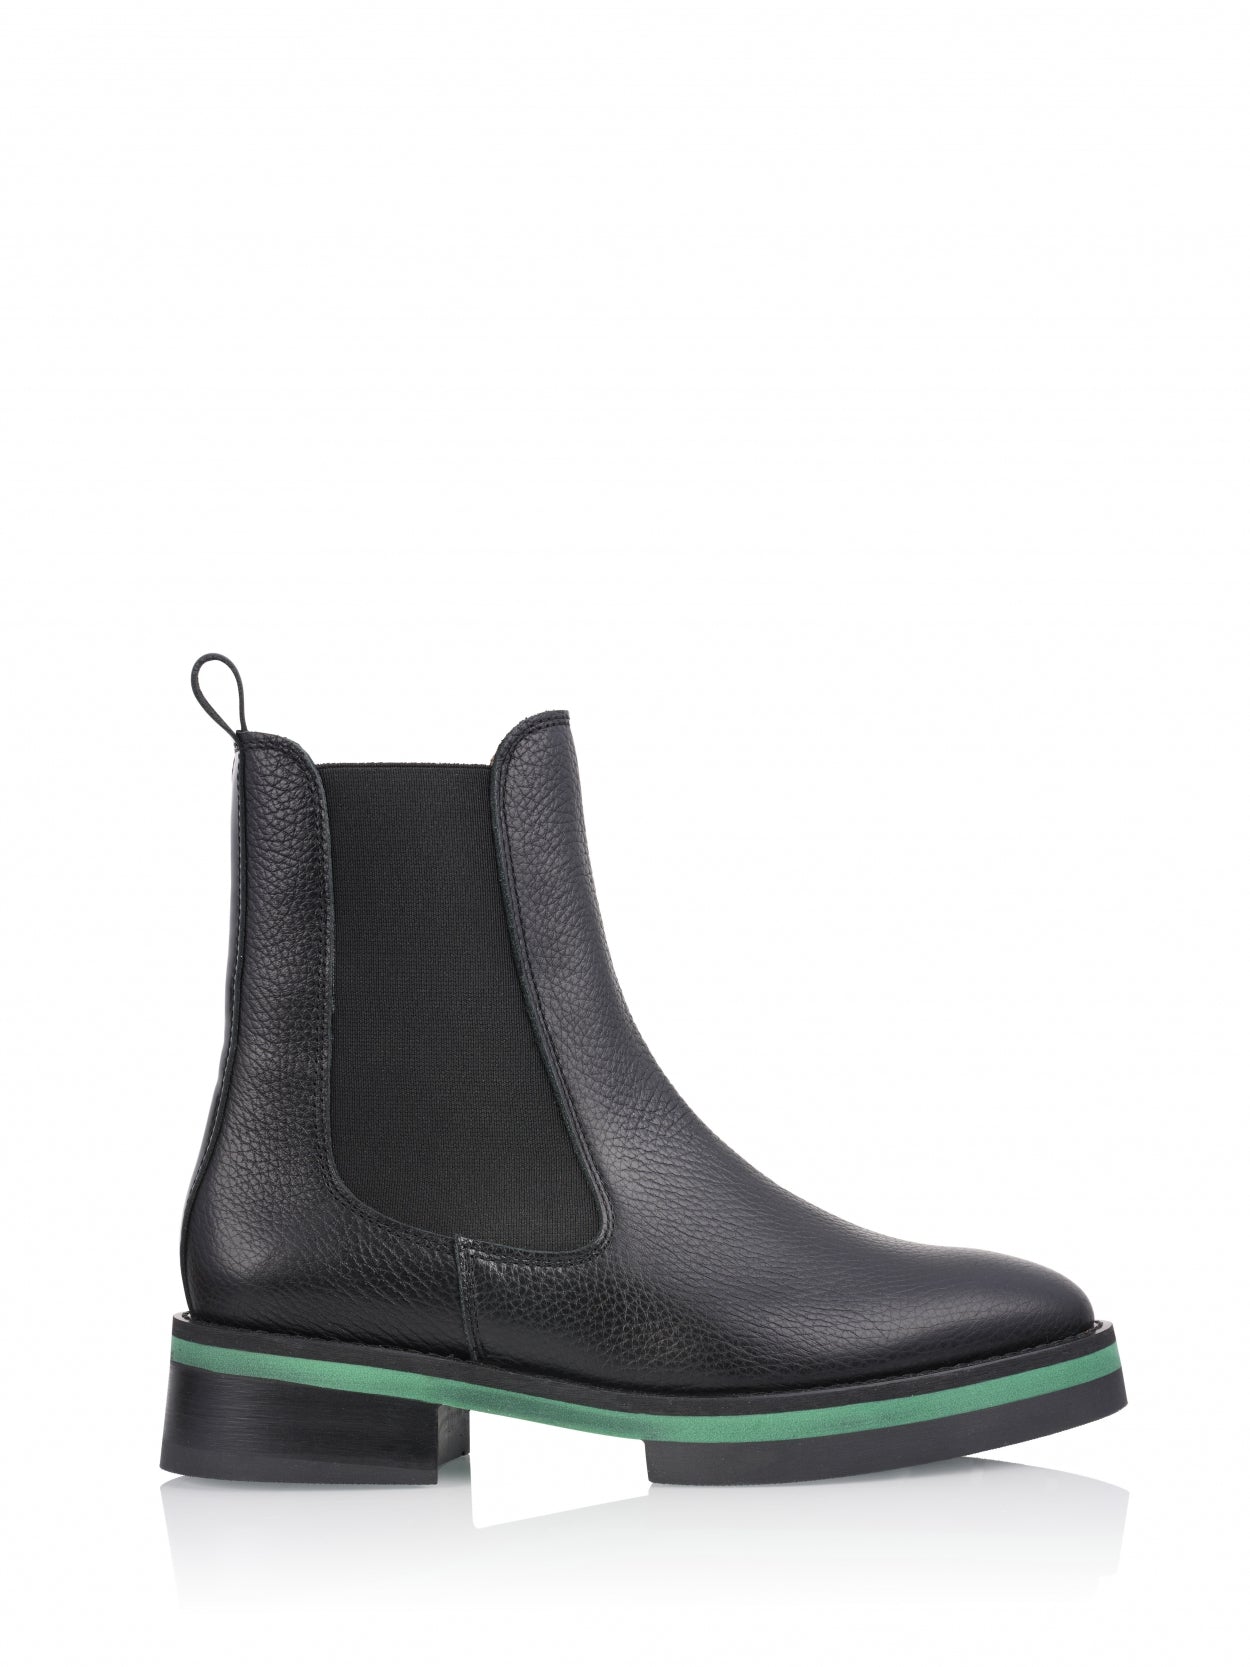 A great little Chelsea boot from European brand&nbsp;DWRS.&nbsp;This simple pull on leather boot is super comfortable for everyday wear. The bright green stripe around the boot above the sole adds that's point of difference.